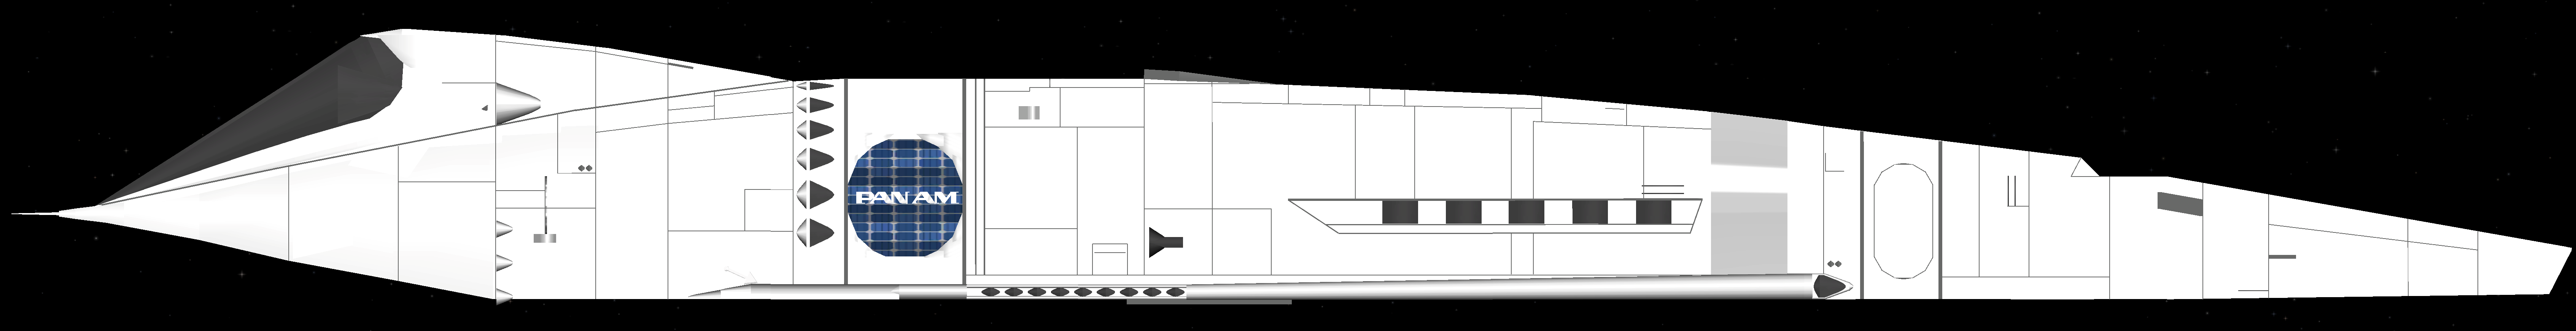 Orion III Space Clipper HighResPic (2).png